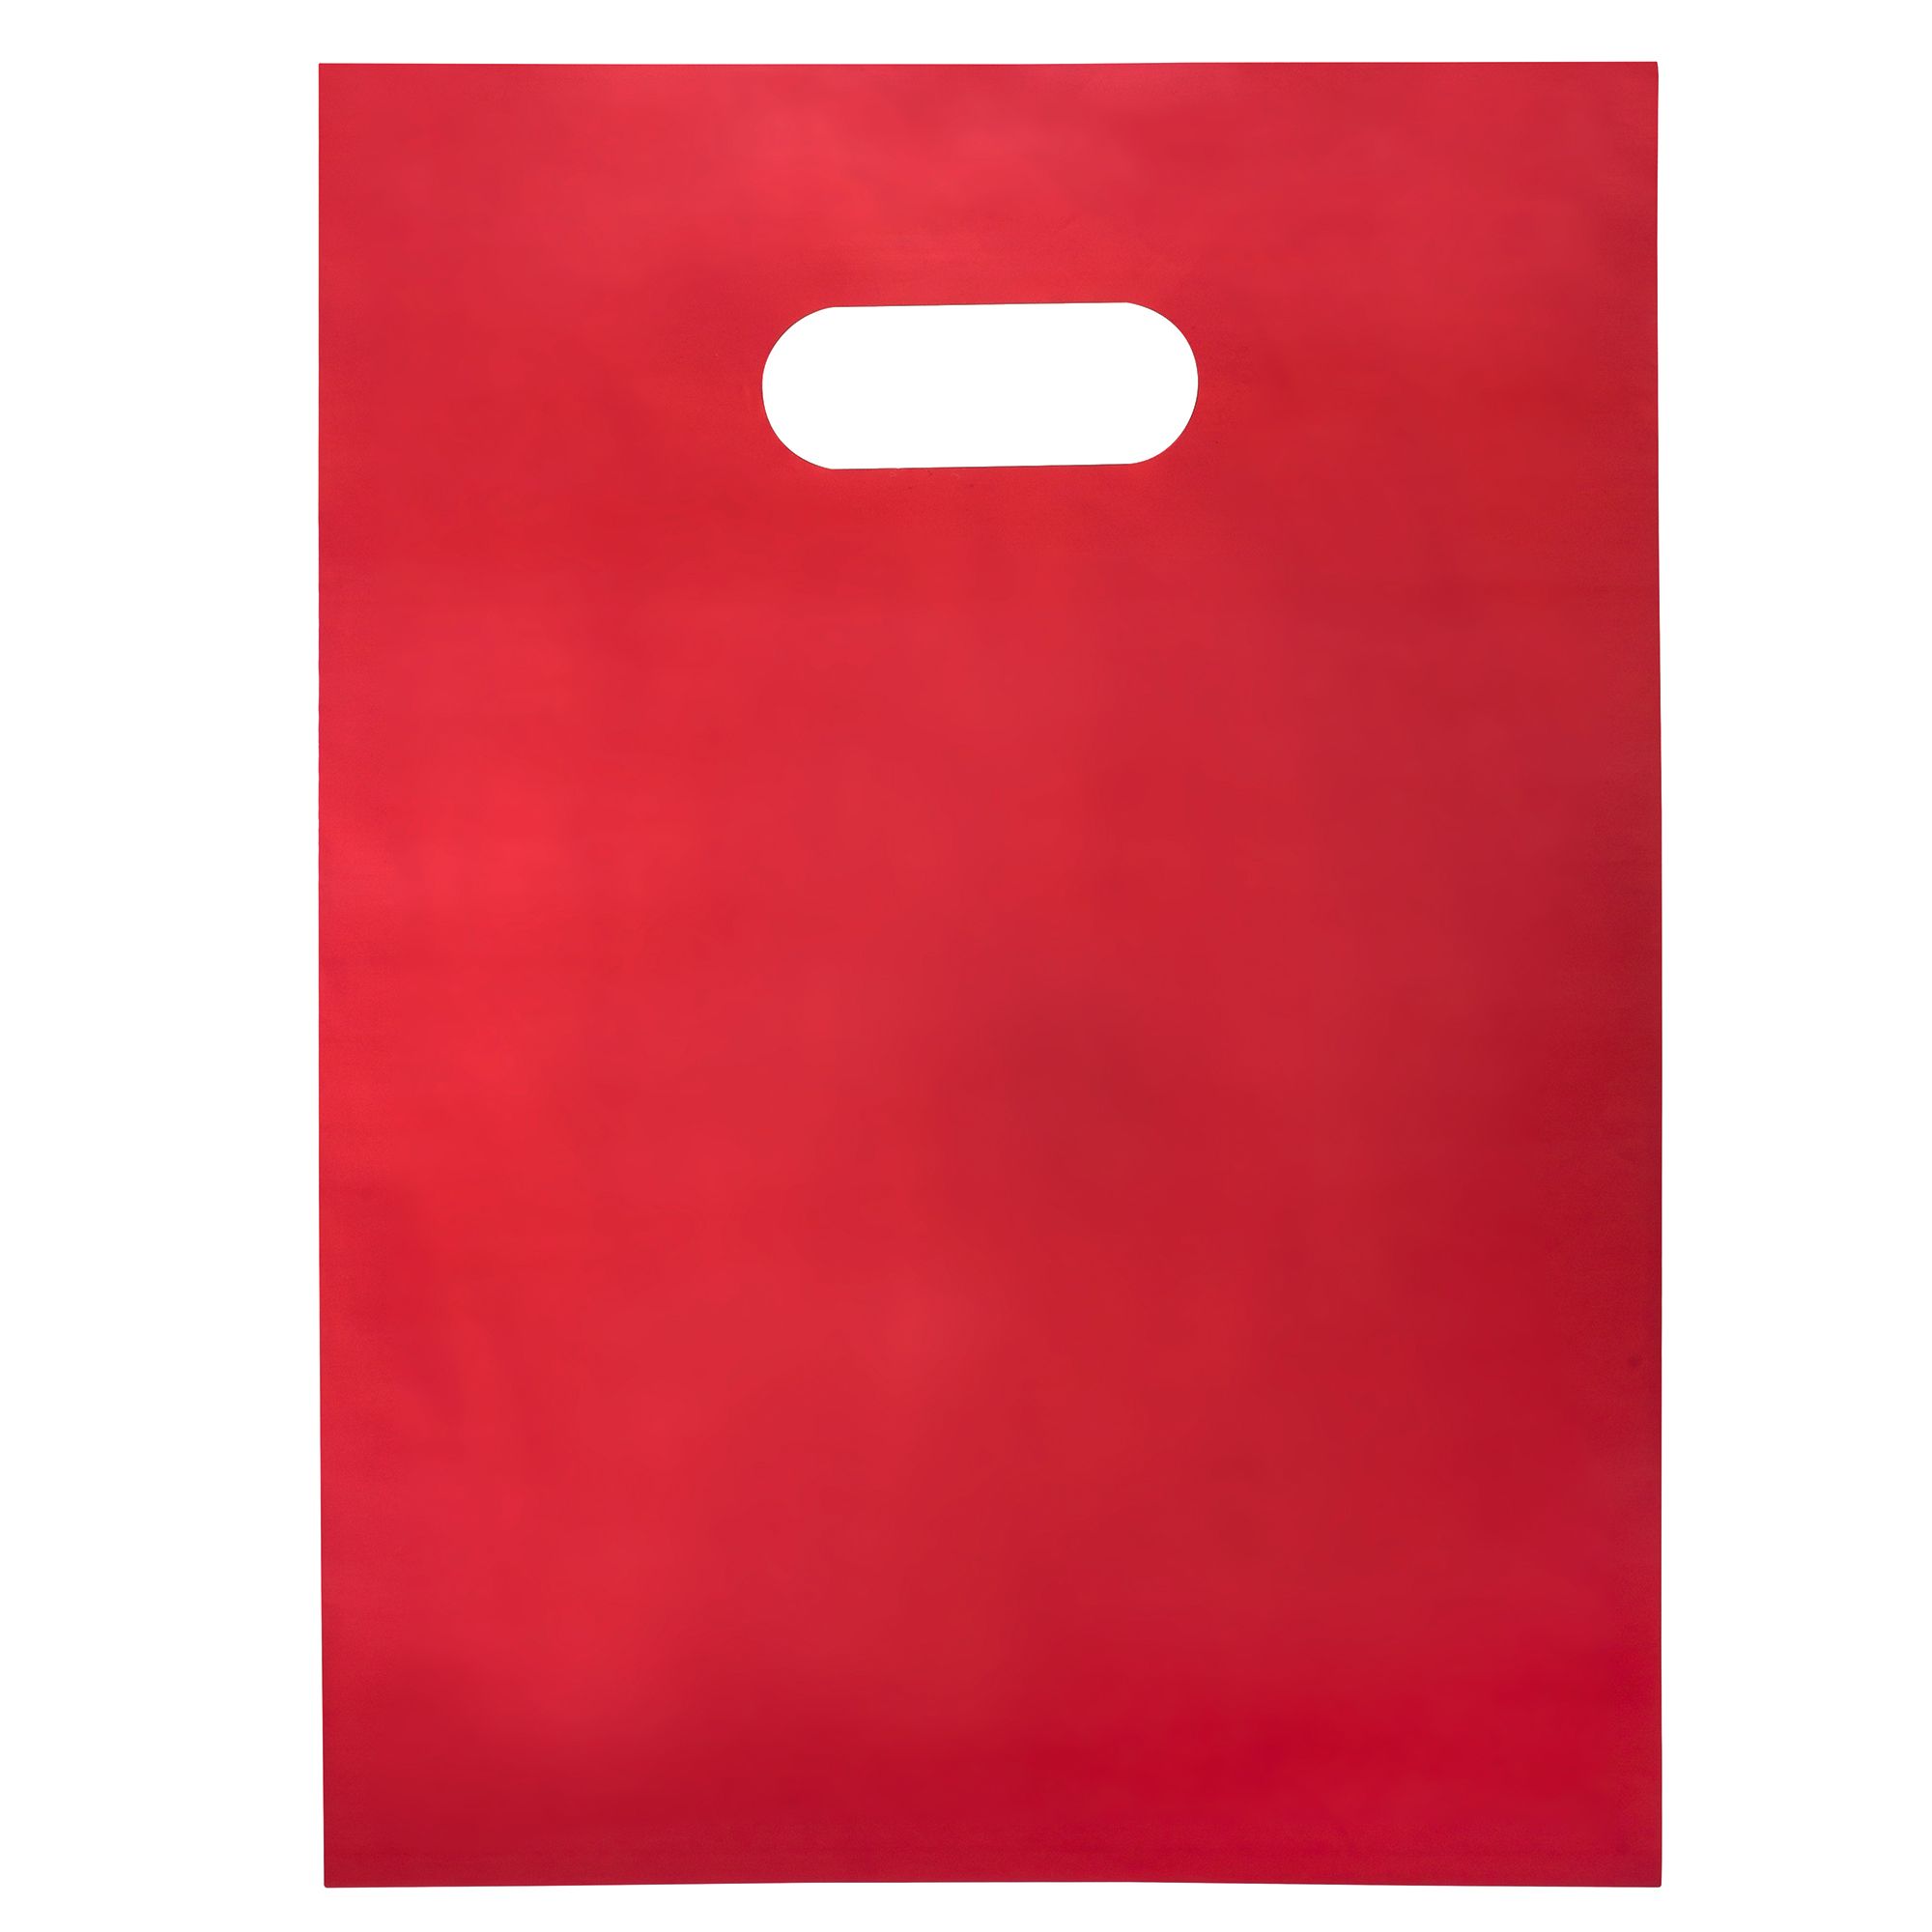 200 Red 1.5Mil, 9" x 12" Extra Thick Glossy Plastic Retail Merchandise Bags with Die Cut Handles, No Gusset- Perfect Thank You Bags for Customers, Boutique bags, Gifts and Tradeshows…